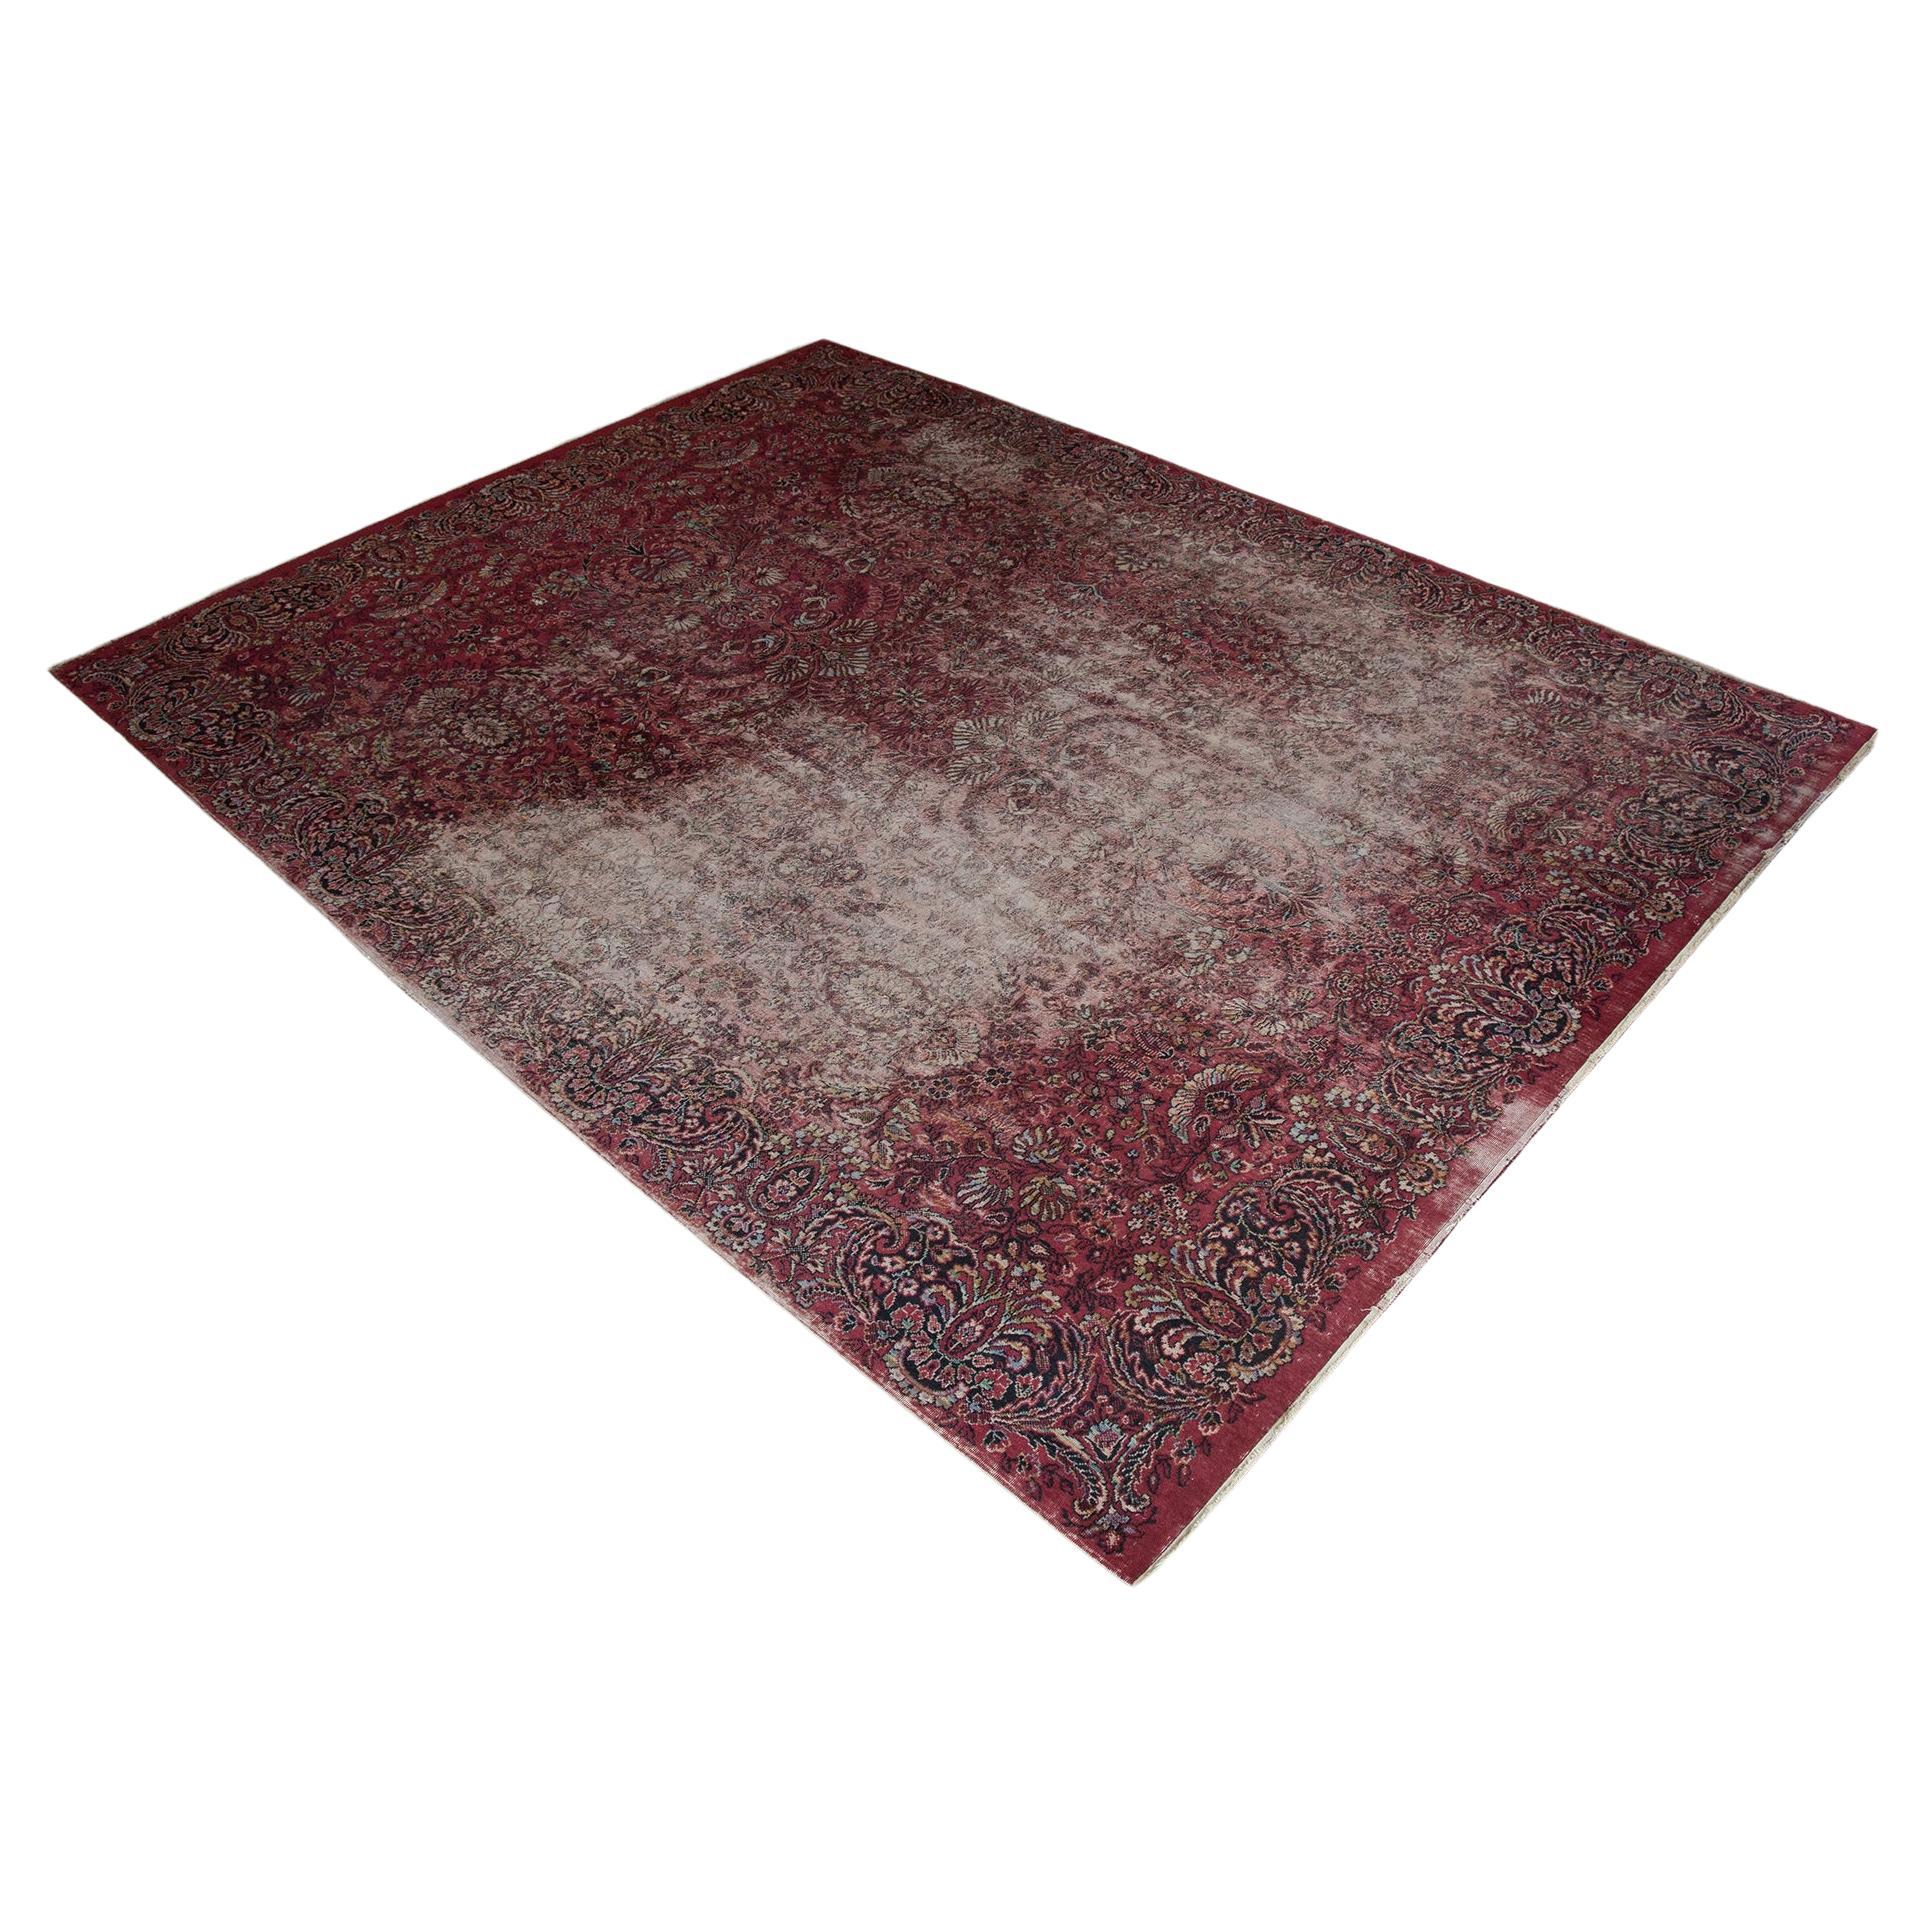 Antique Rug Vegetable Dyed Oriental Persian European Rich Red Nice Aged Wear For Sale